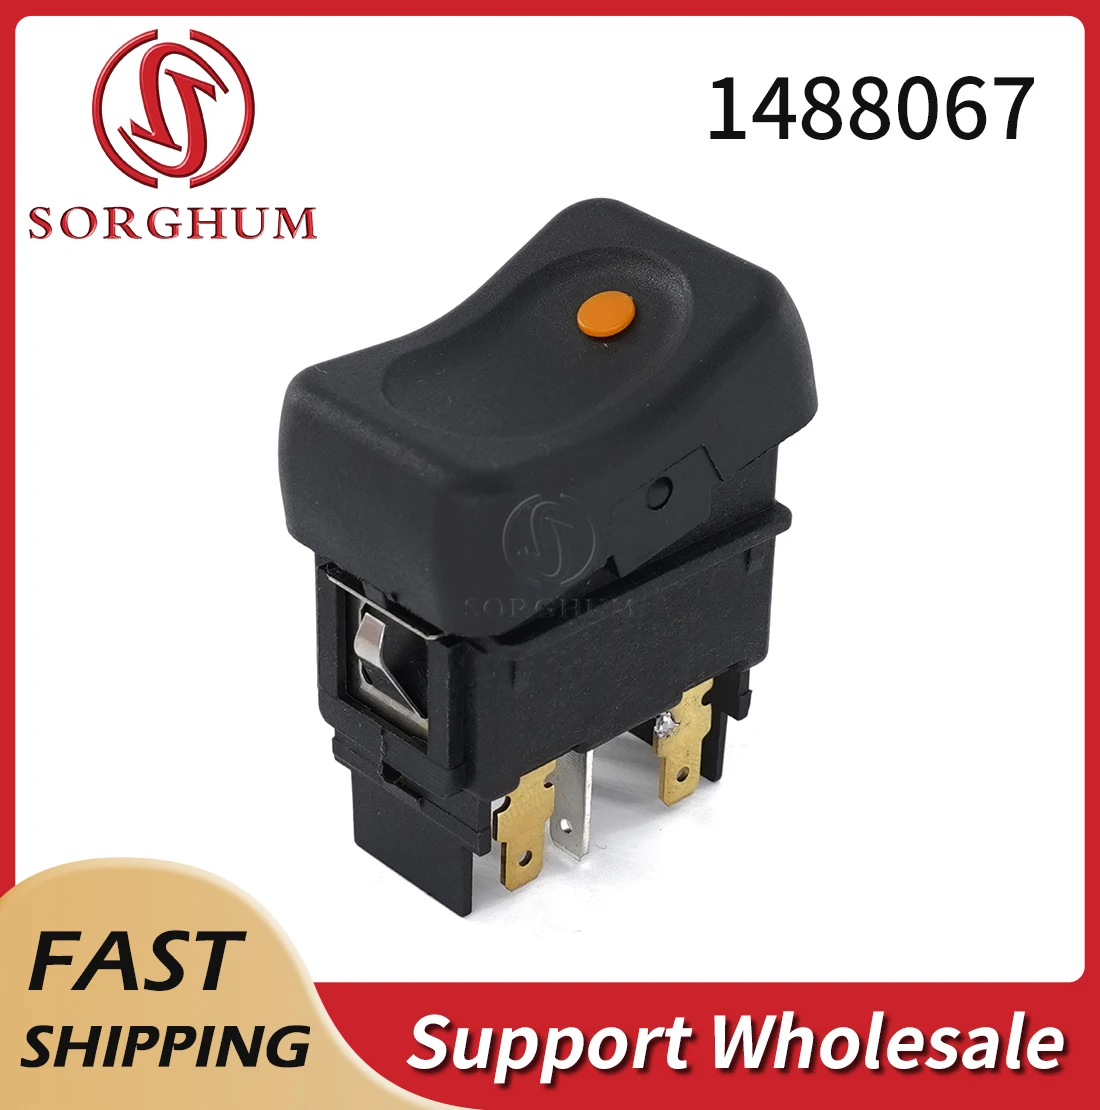 

Sorghum 1488067 6 Pins Passenger Side Single Push Button Electric Power Window Control Lifter Panel Auto Switch For Scania Truck